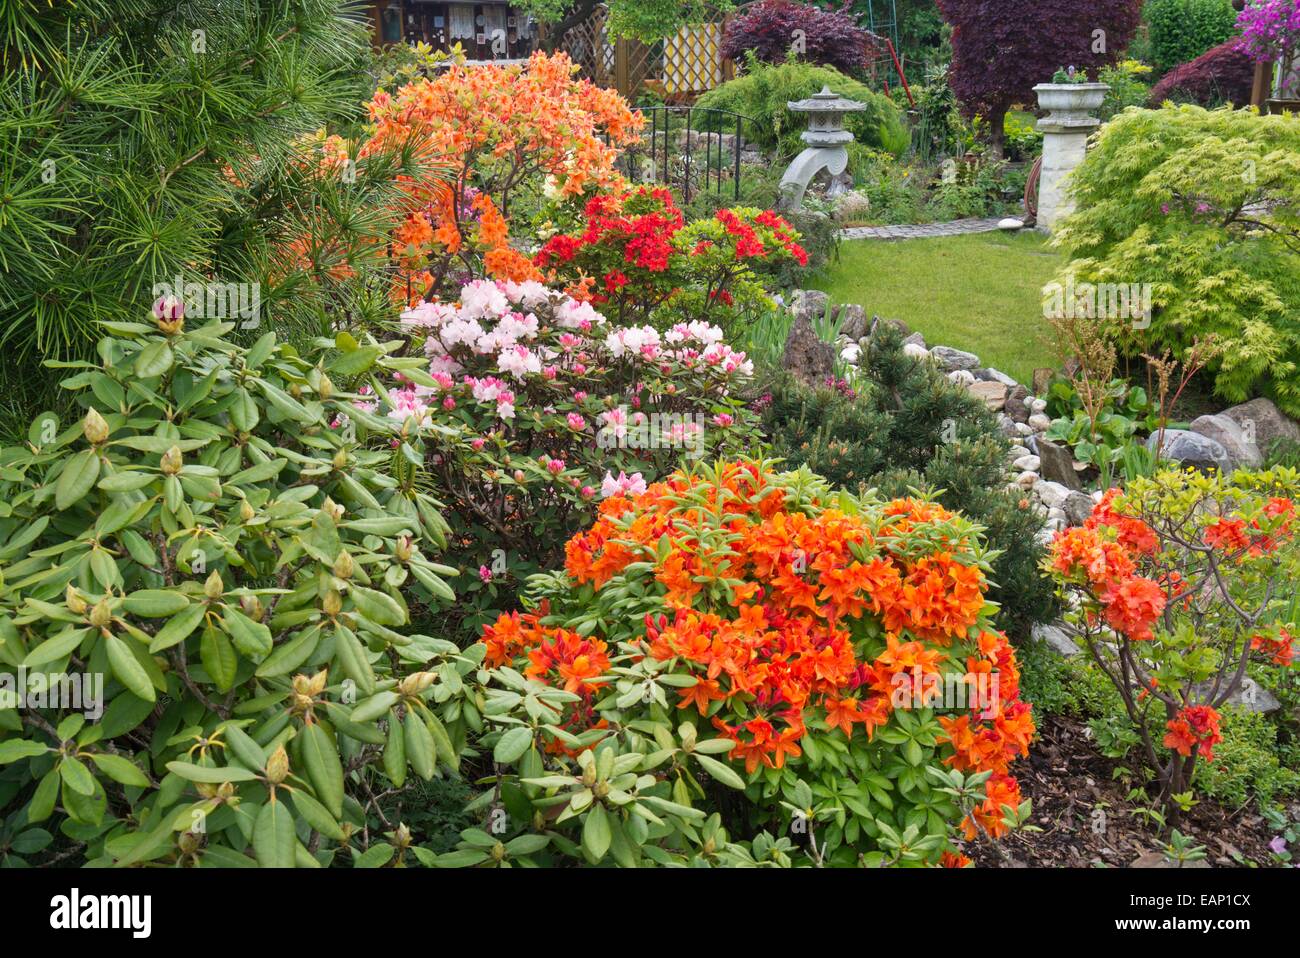 Rhododendrons (Rhododendron) and azaleas (Rhododendron) Stock Photo